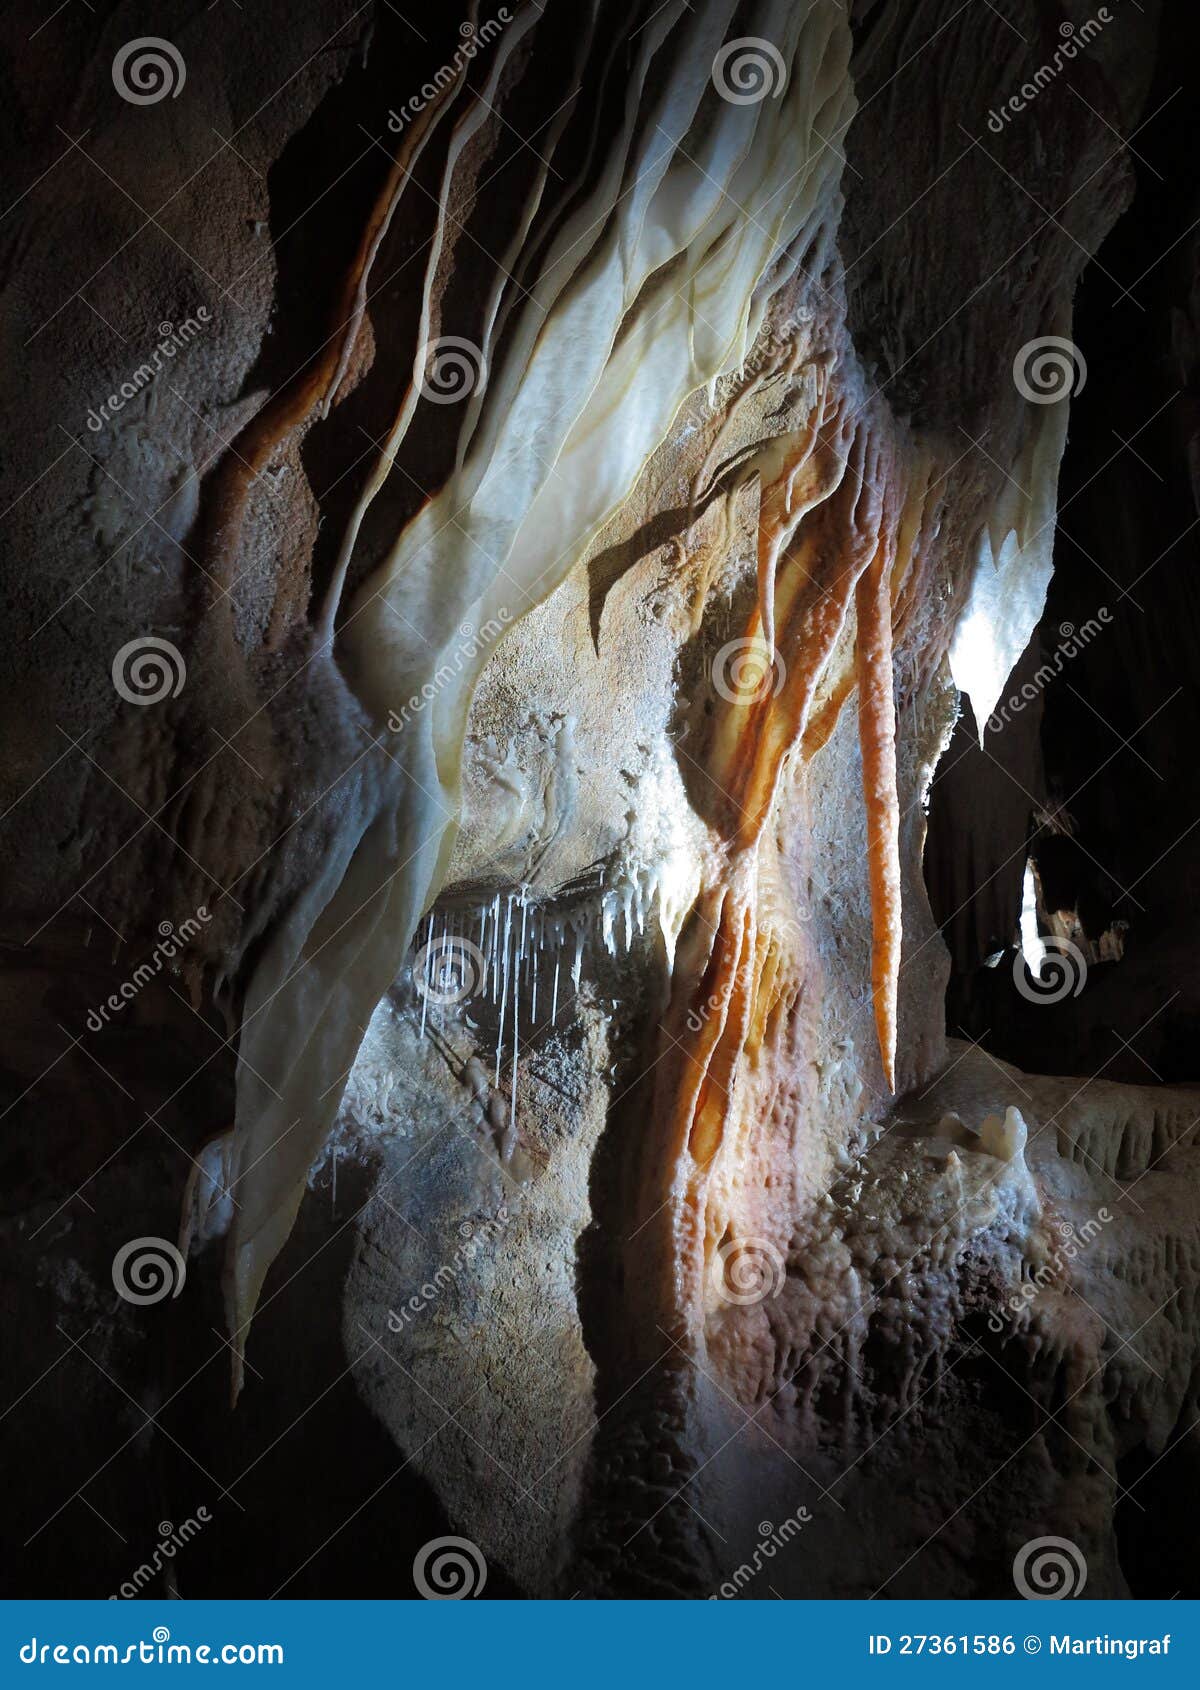 details of cave formations in jenolan caves, australia